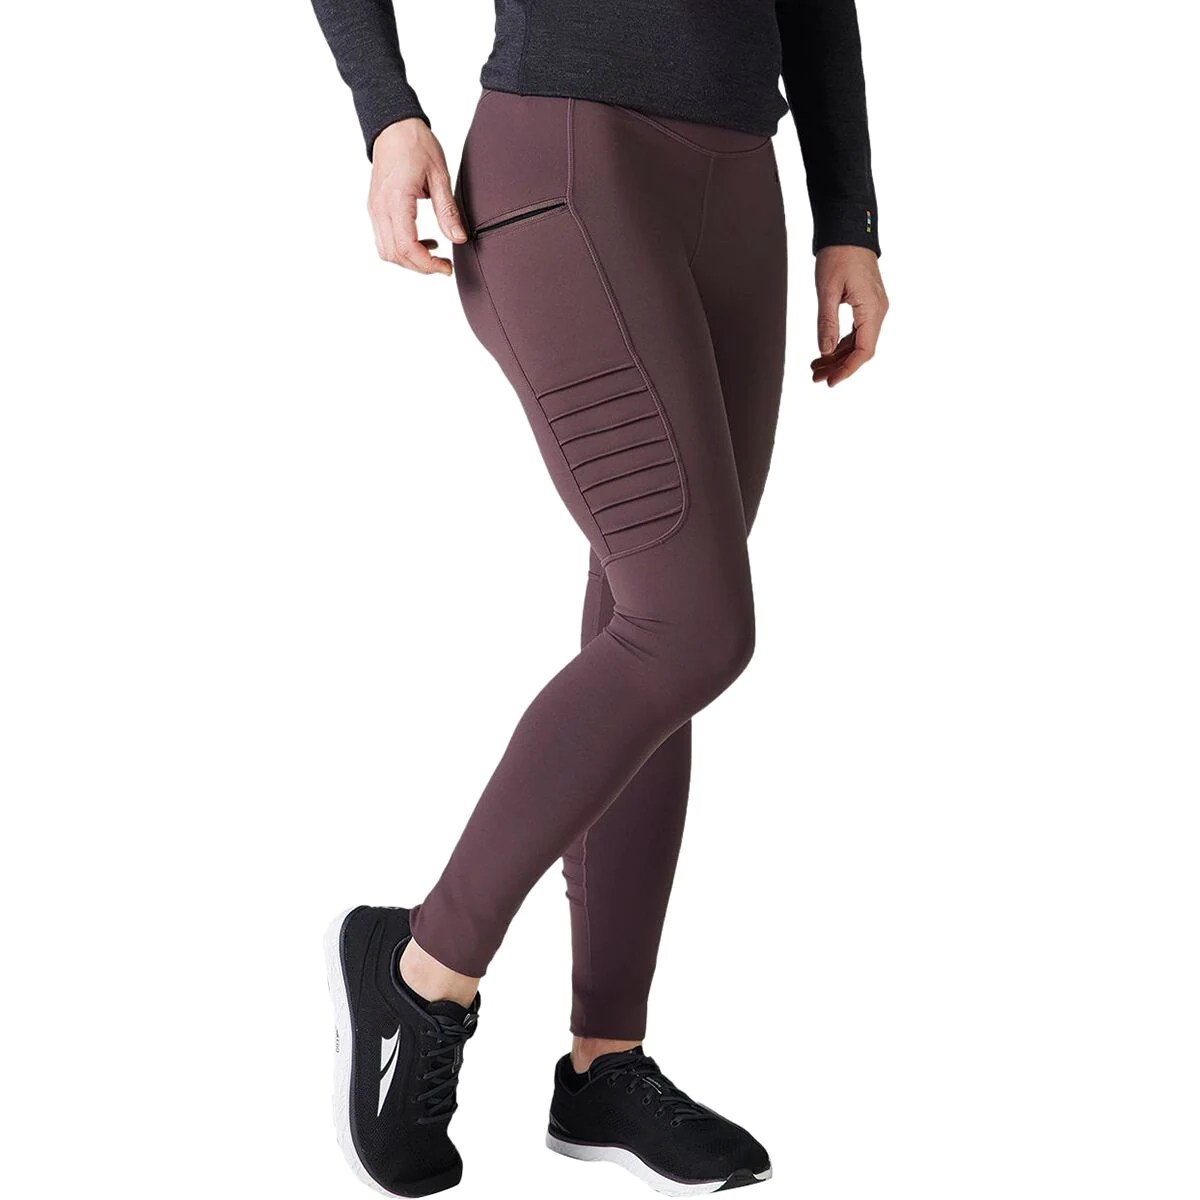 model wearing smartwool merino moto leggings that are on sale at backcountry